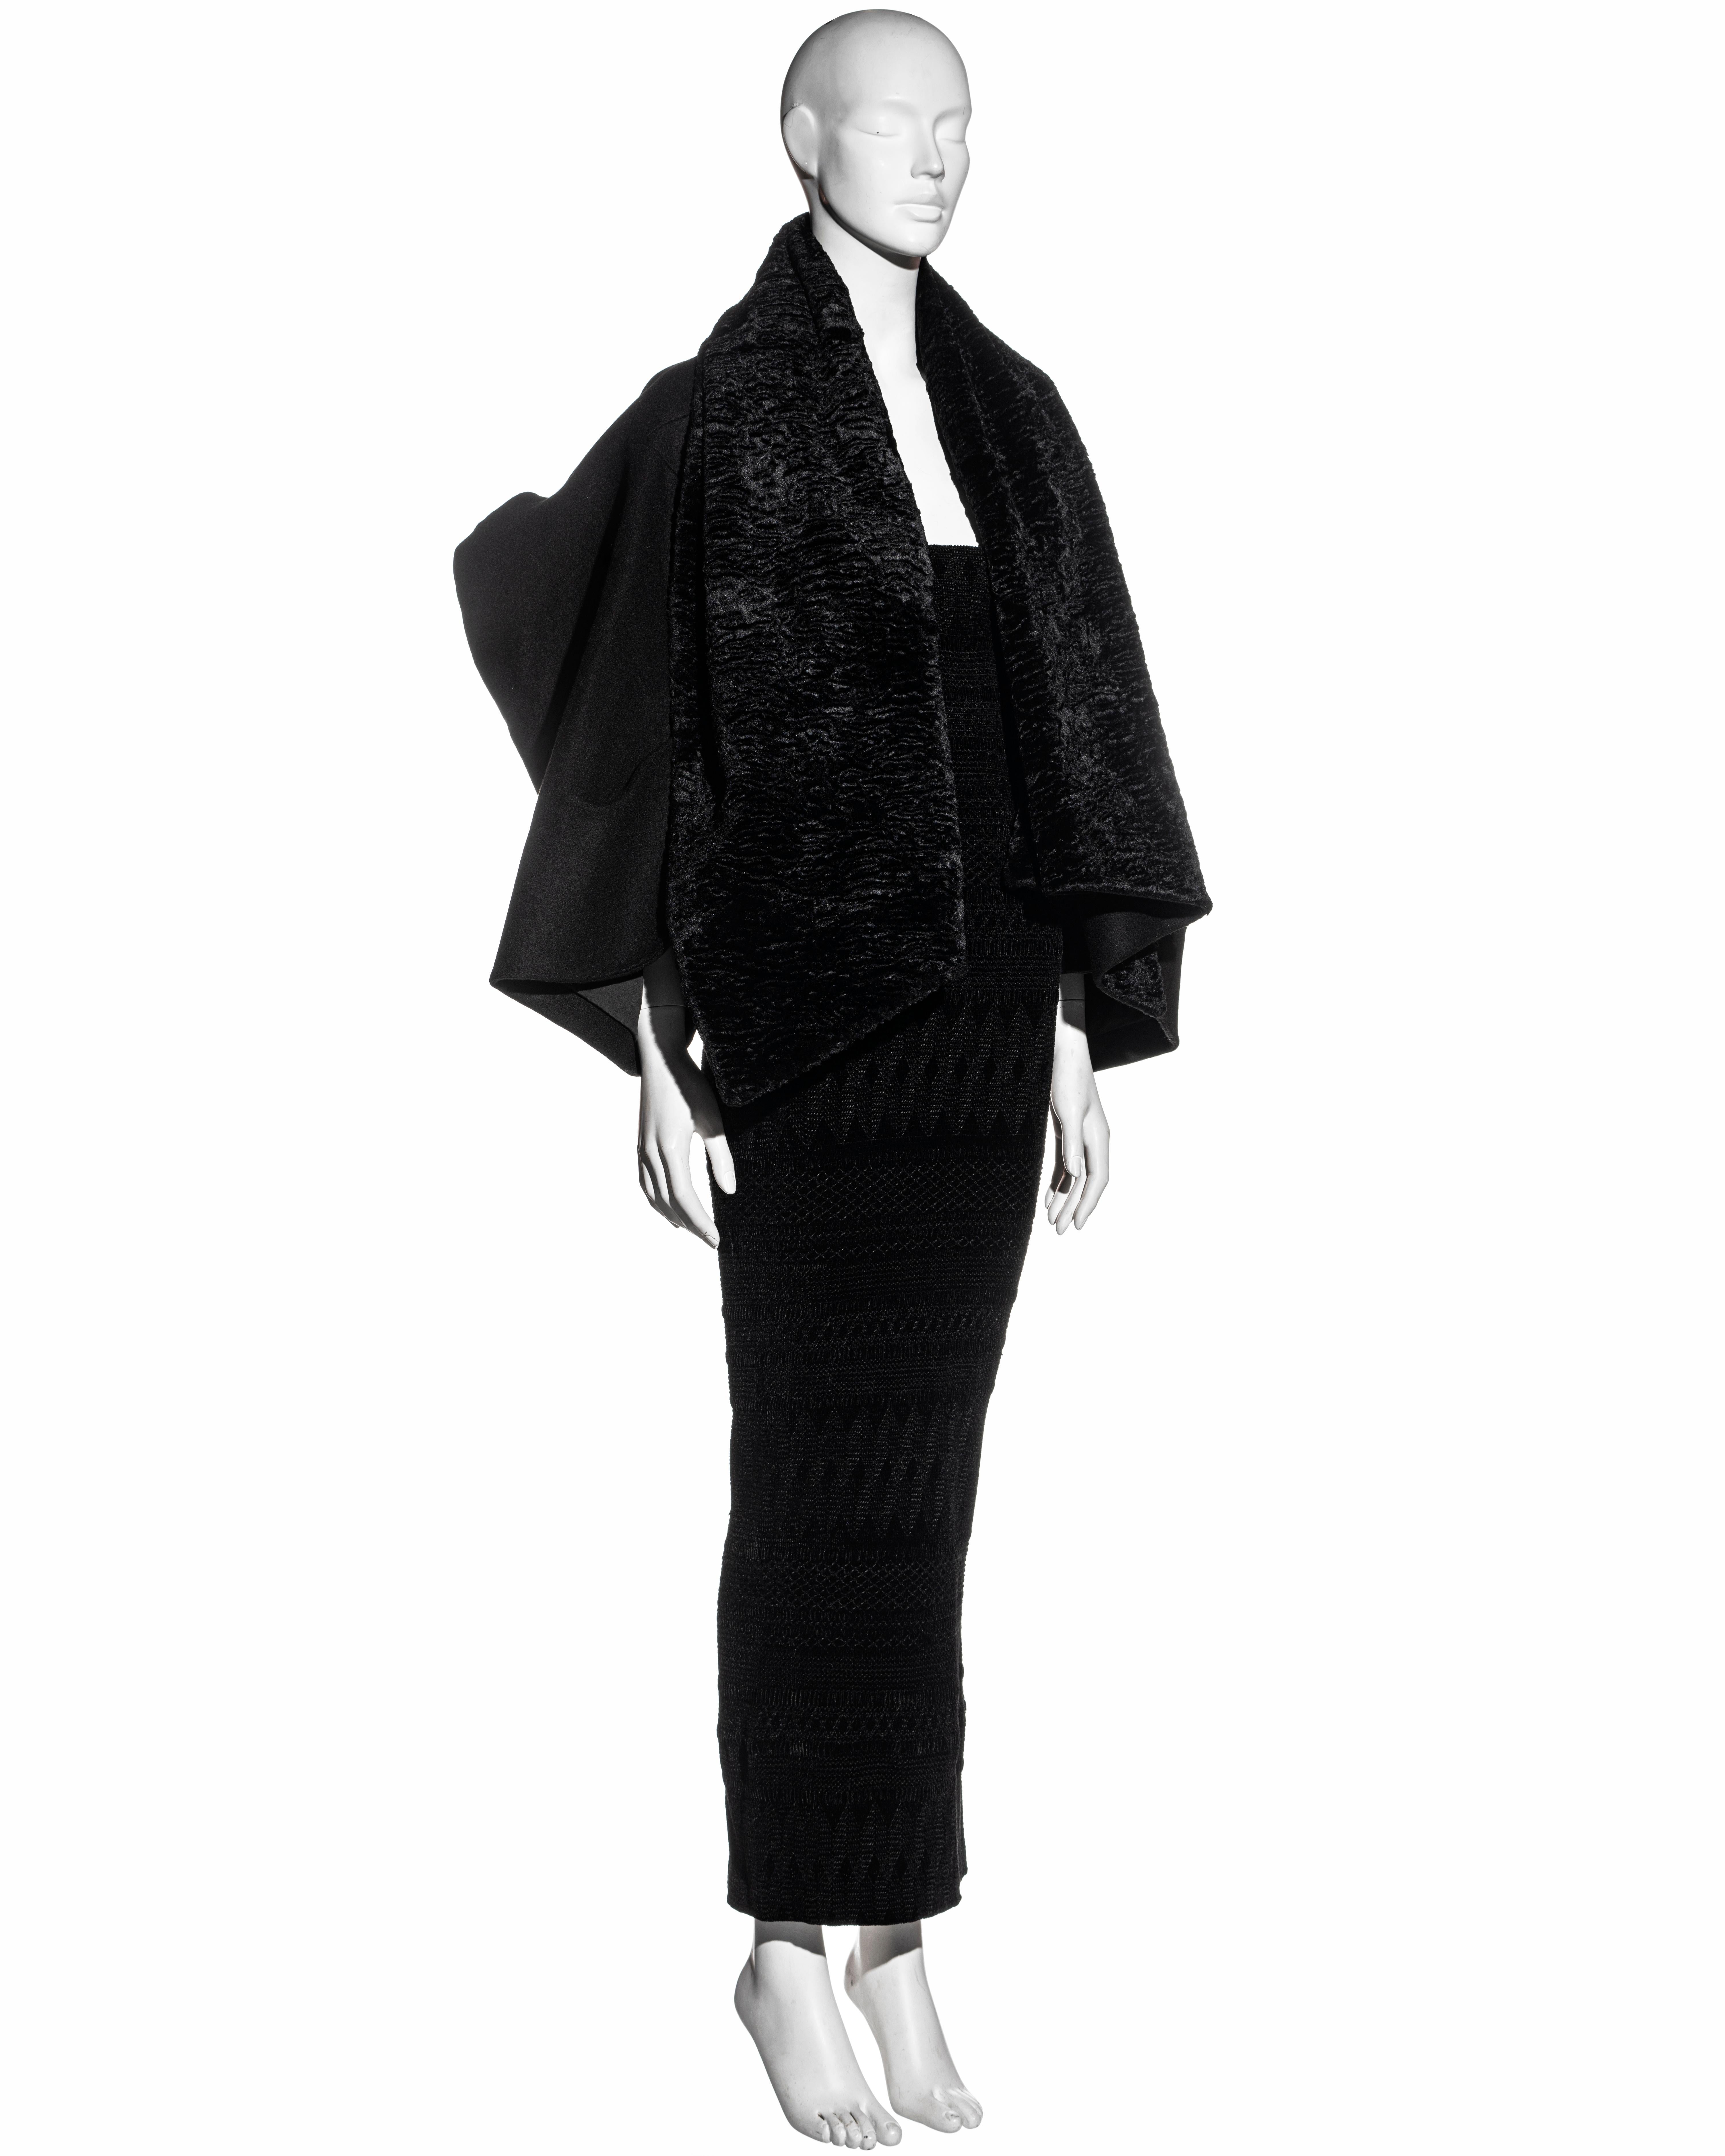 ▪ John Galliano evening ensemble 
▪ Sold by One of a Kind Archive
▪ Black wool upside down cropped opera coat 
▪ Heavyweight wool 
▪ Broad chenille collar embroidered to imitate astrakhan fur 
▪ Shorter back 
▪ Silk lining  
▪ Embroidered chenille